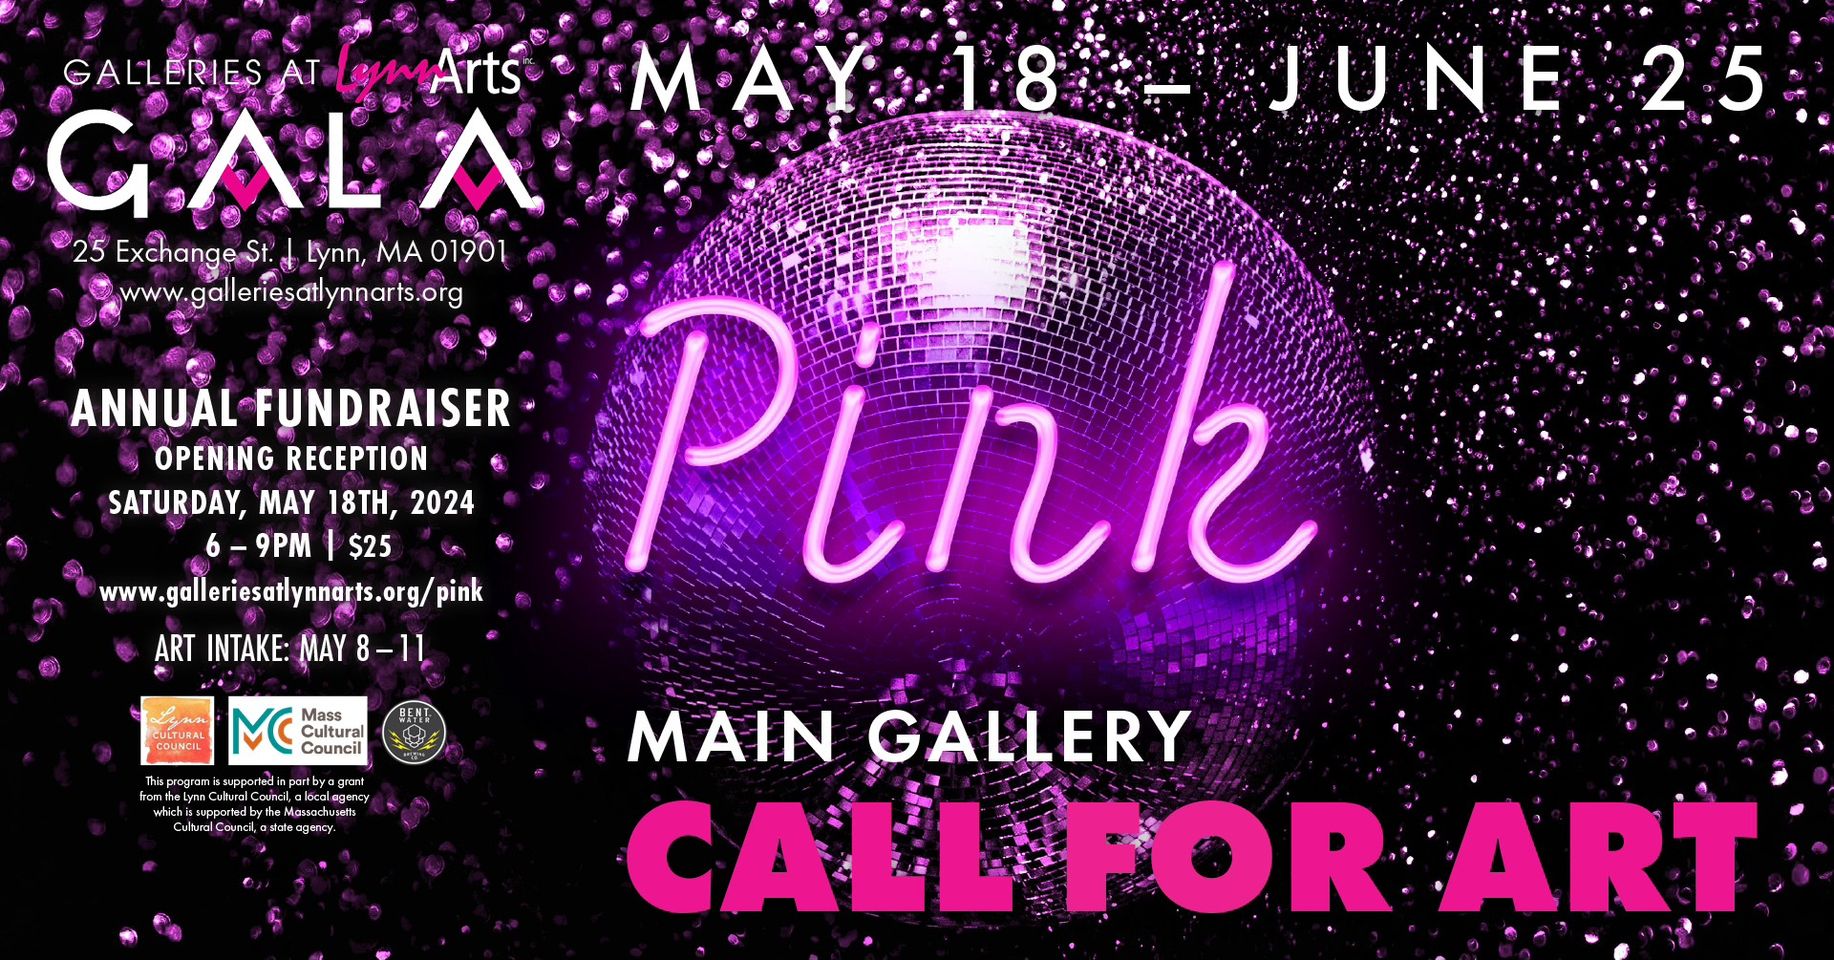 Join the "Pink" art event at Gala Arts from May 18 to June 25. Don't miss out on our exciting annual fundraiser, where we are also welcoming art submissions. The highlight of this year's event is a huge, sparkling pink disco ball. Participate, have fun and let your art shine bright!